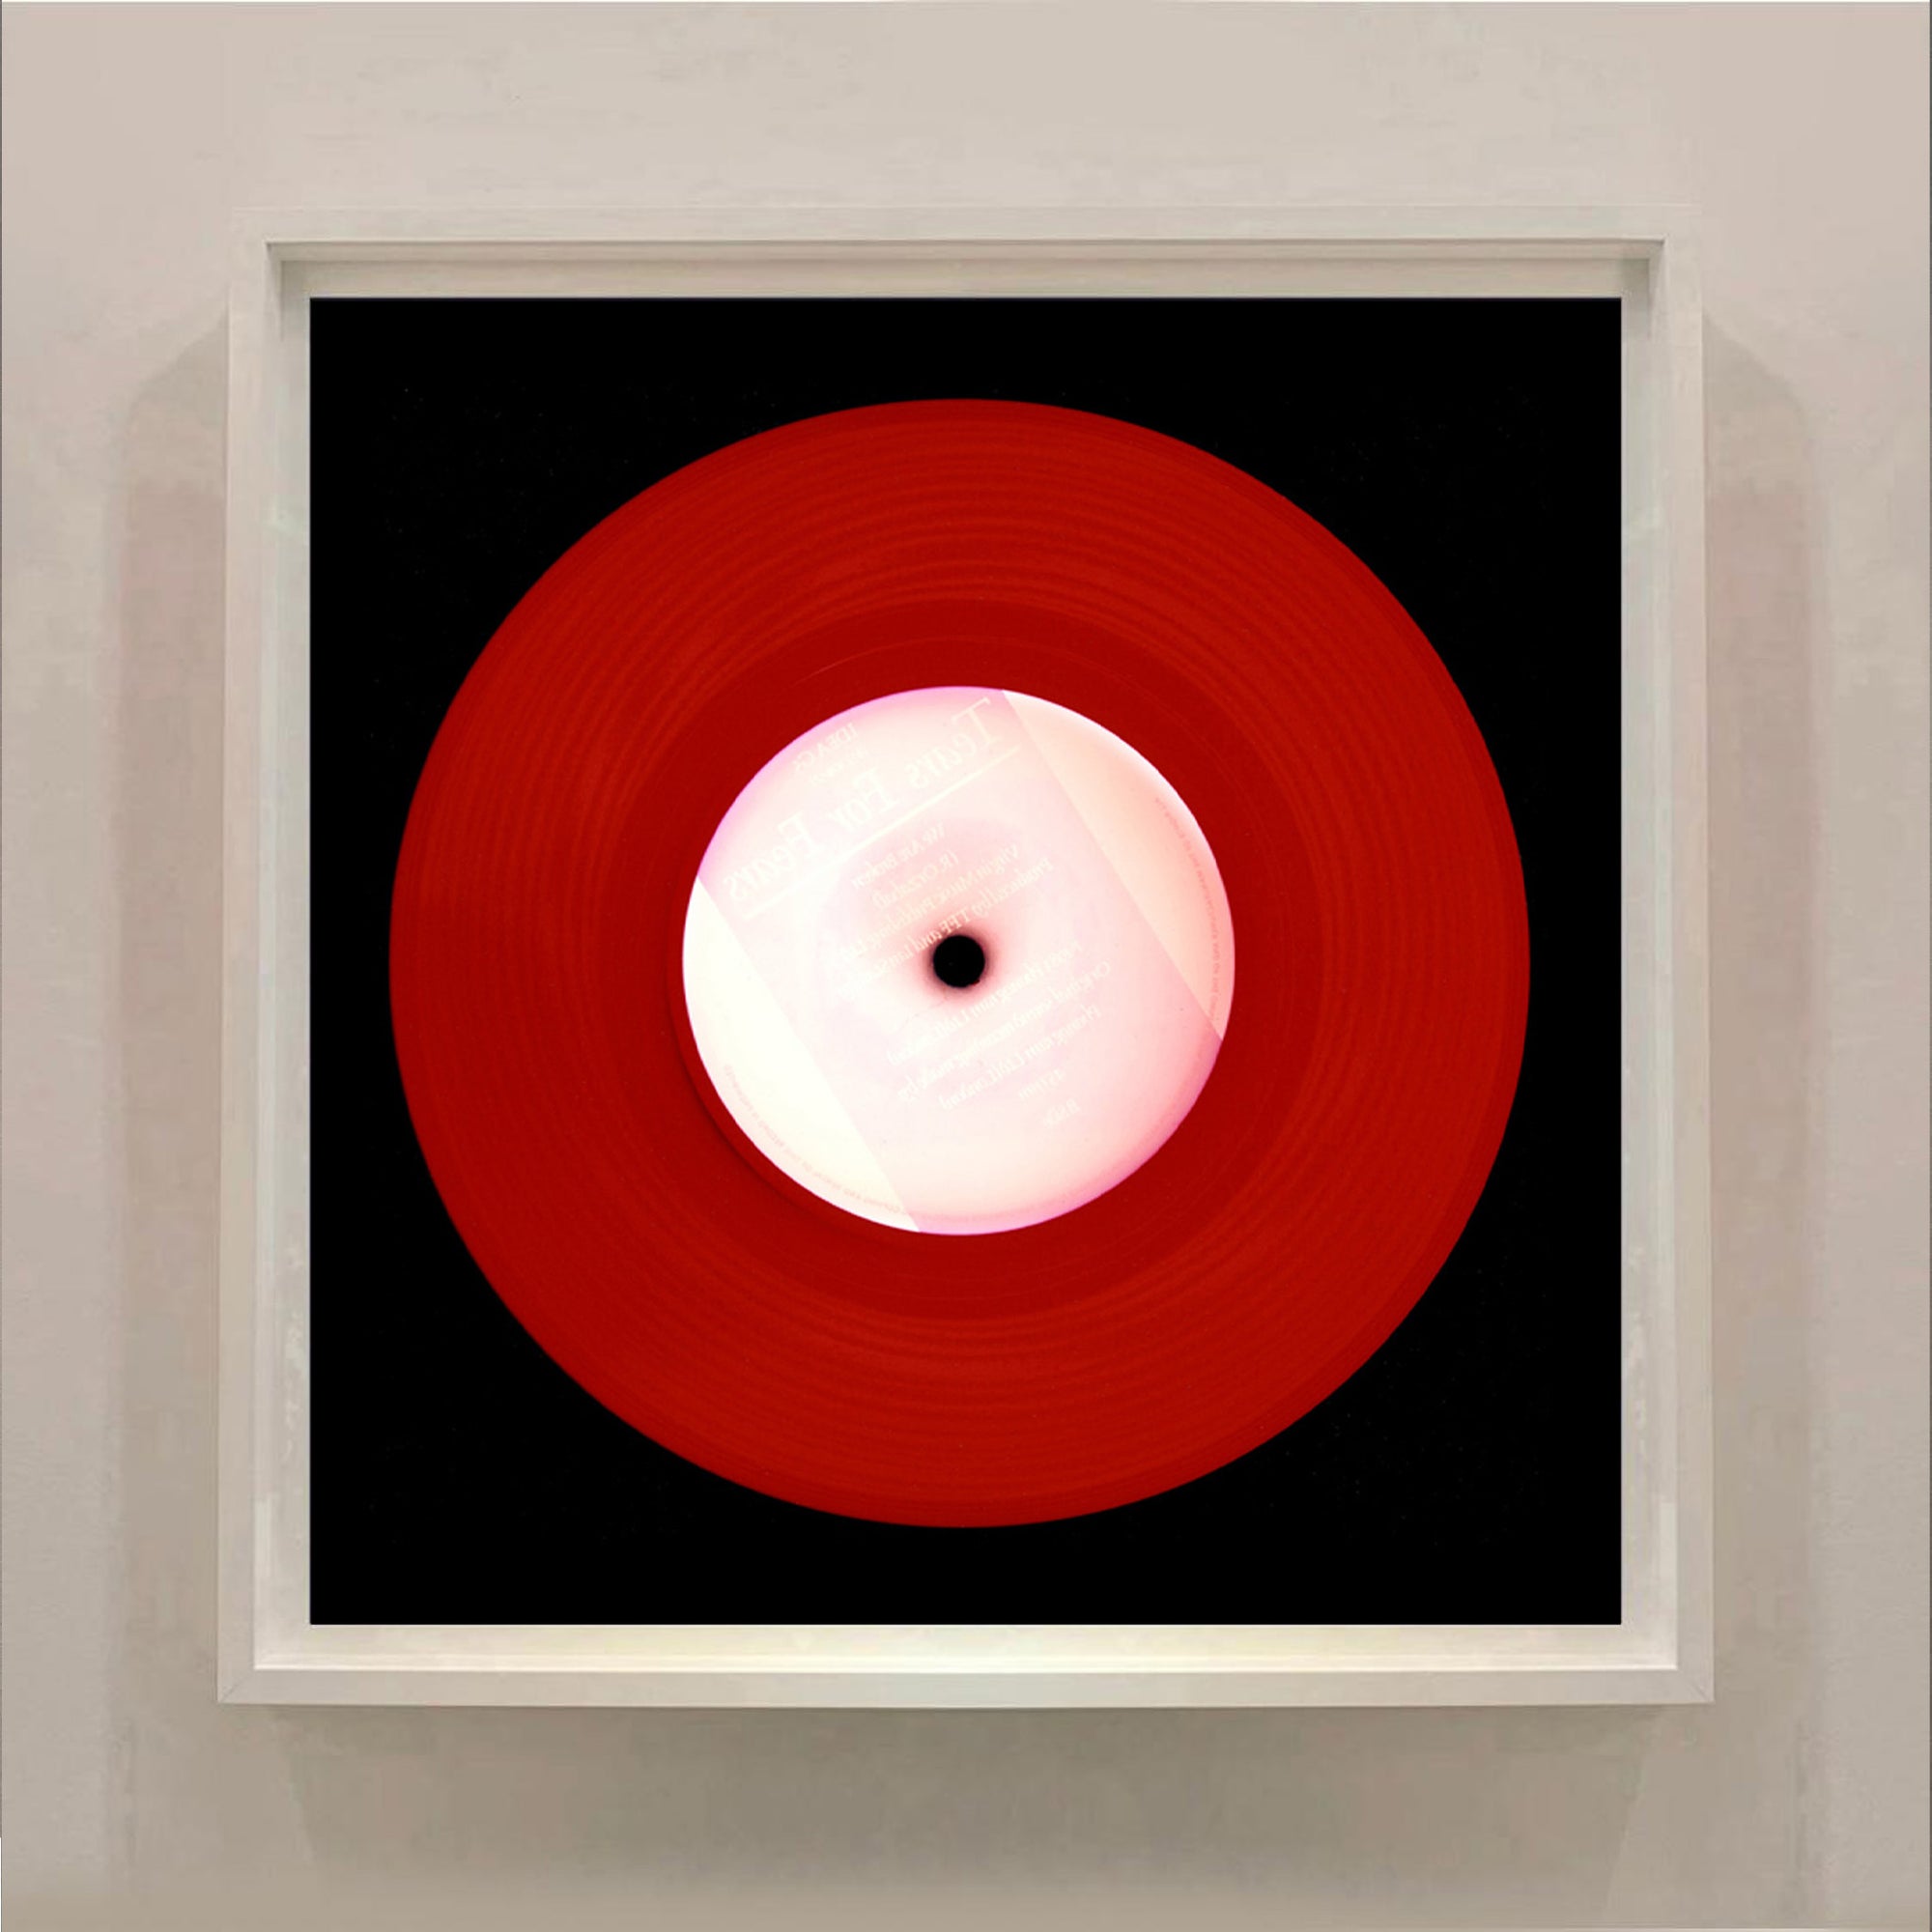 Vinyl Collection 'Idea' (Rose), 2015. Acclaimed contemporary photographers, Richard Heeps and Natasha Heidler have collaborated to make this beautifully mesmerising collection. A celebration of the vinyl record and analogue technology, which reflects the artists practice within photography. 